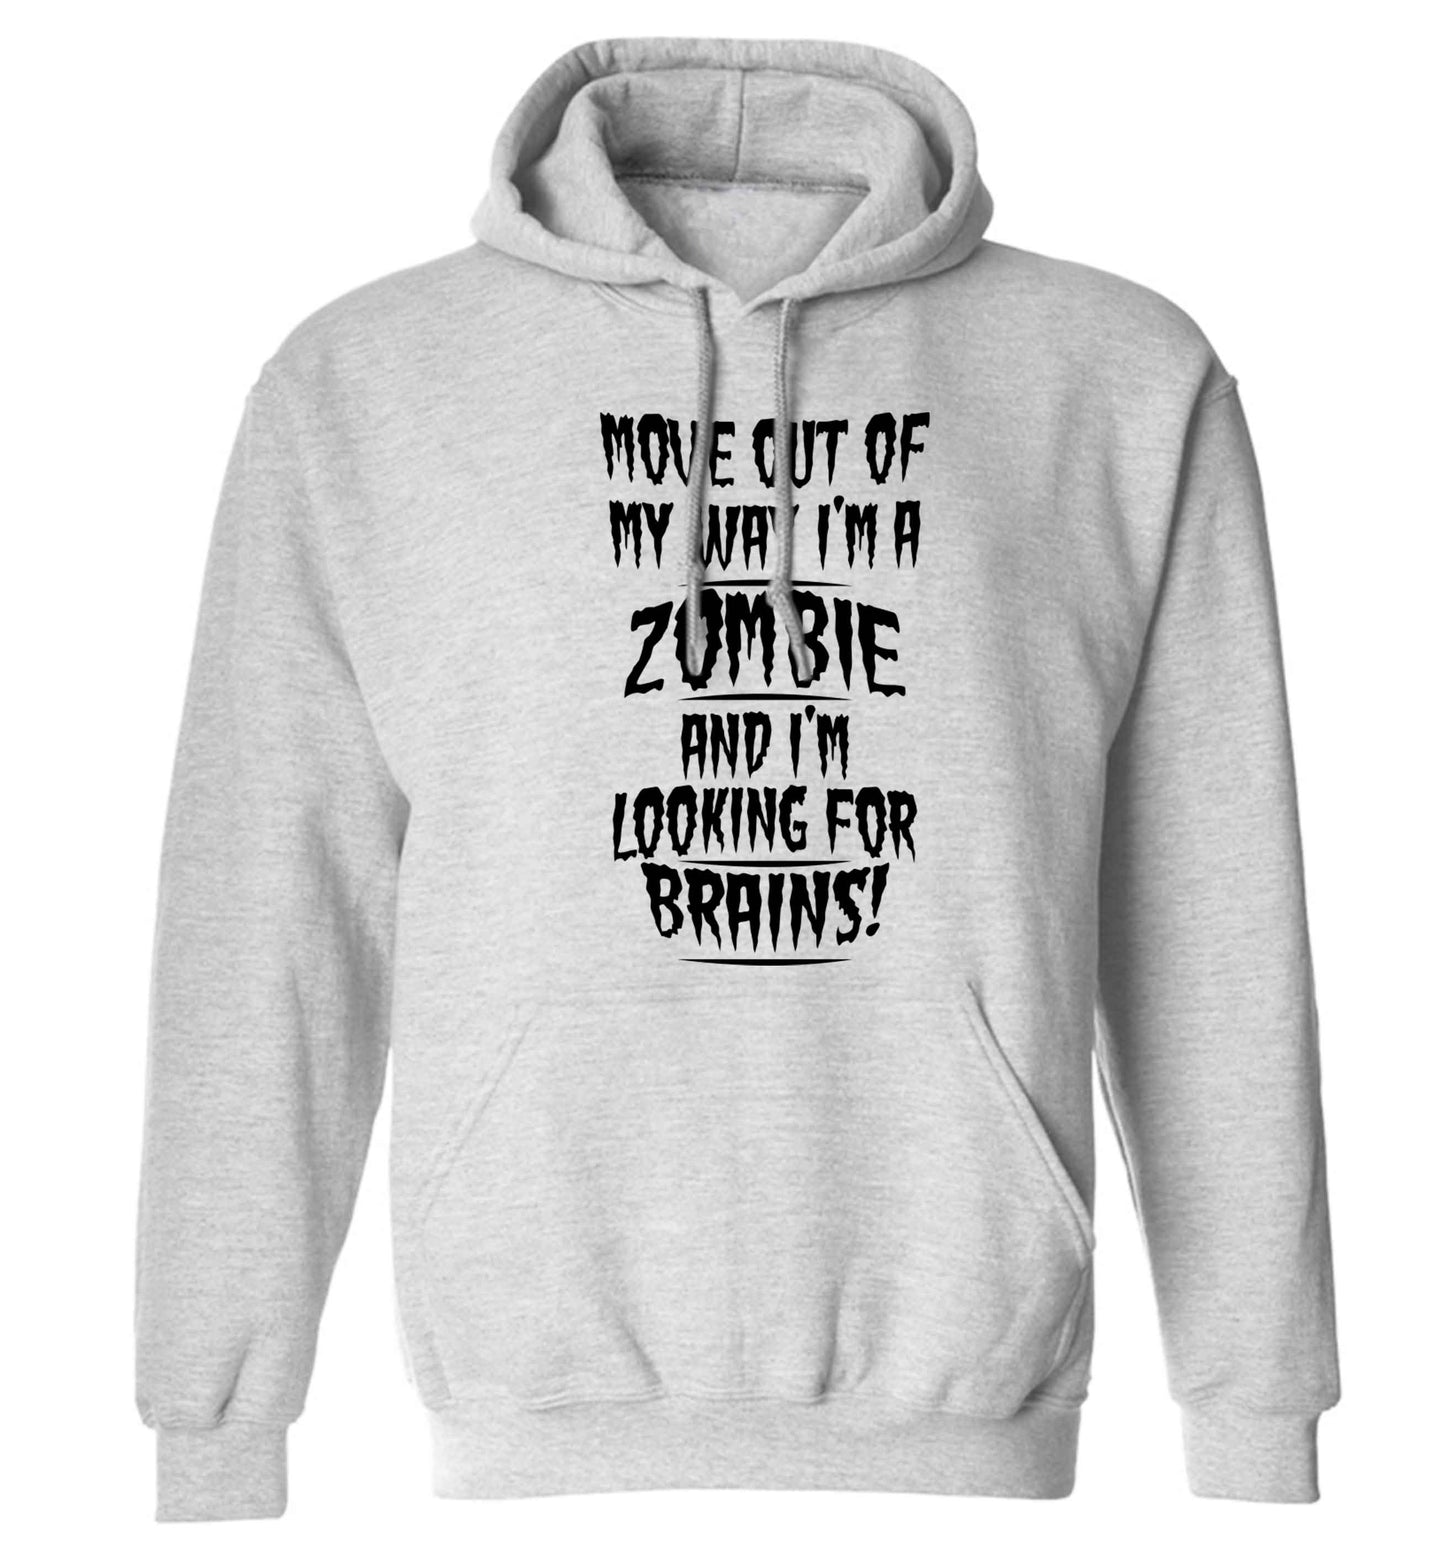 I'm a zombie and I'm looking for brains! adults unisex grey hoodie 2XL